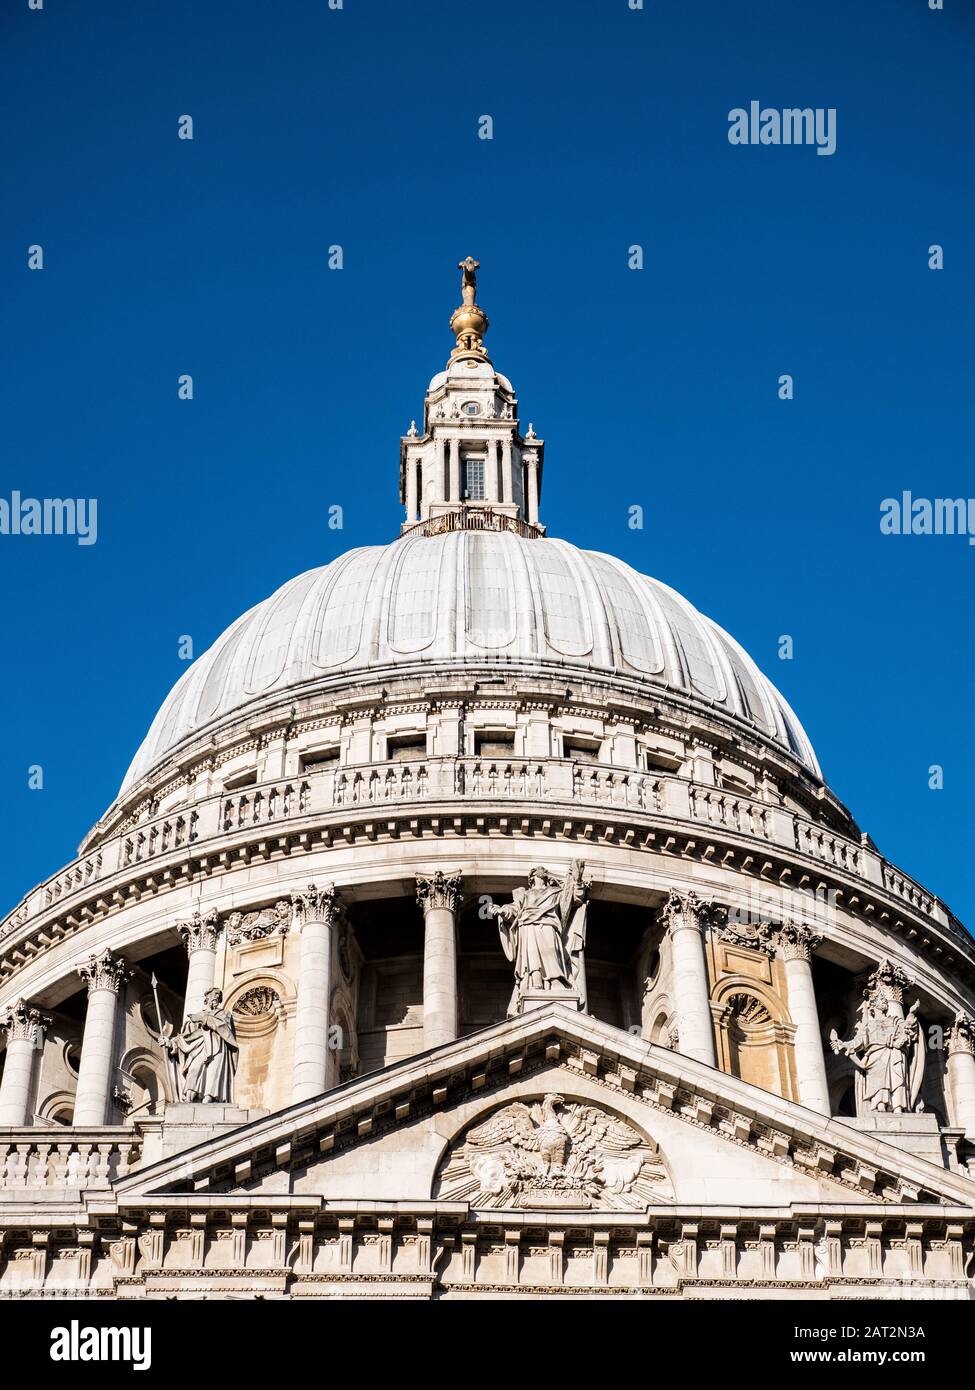 London Landmark, St Pauls Cathedral, City Of London, Londres, Angleterre, Royaume-Uni, Gb. Banque D'Images